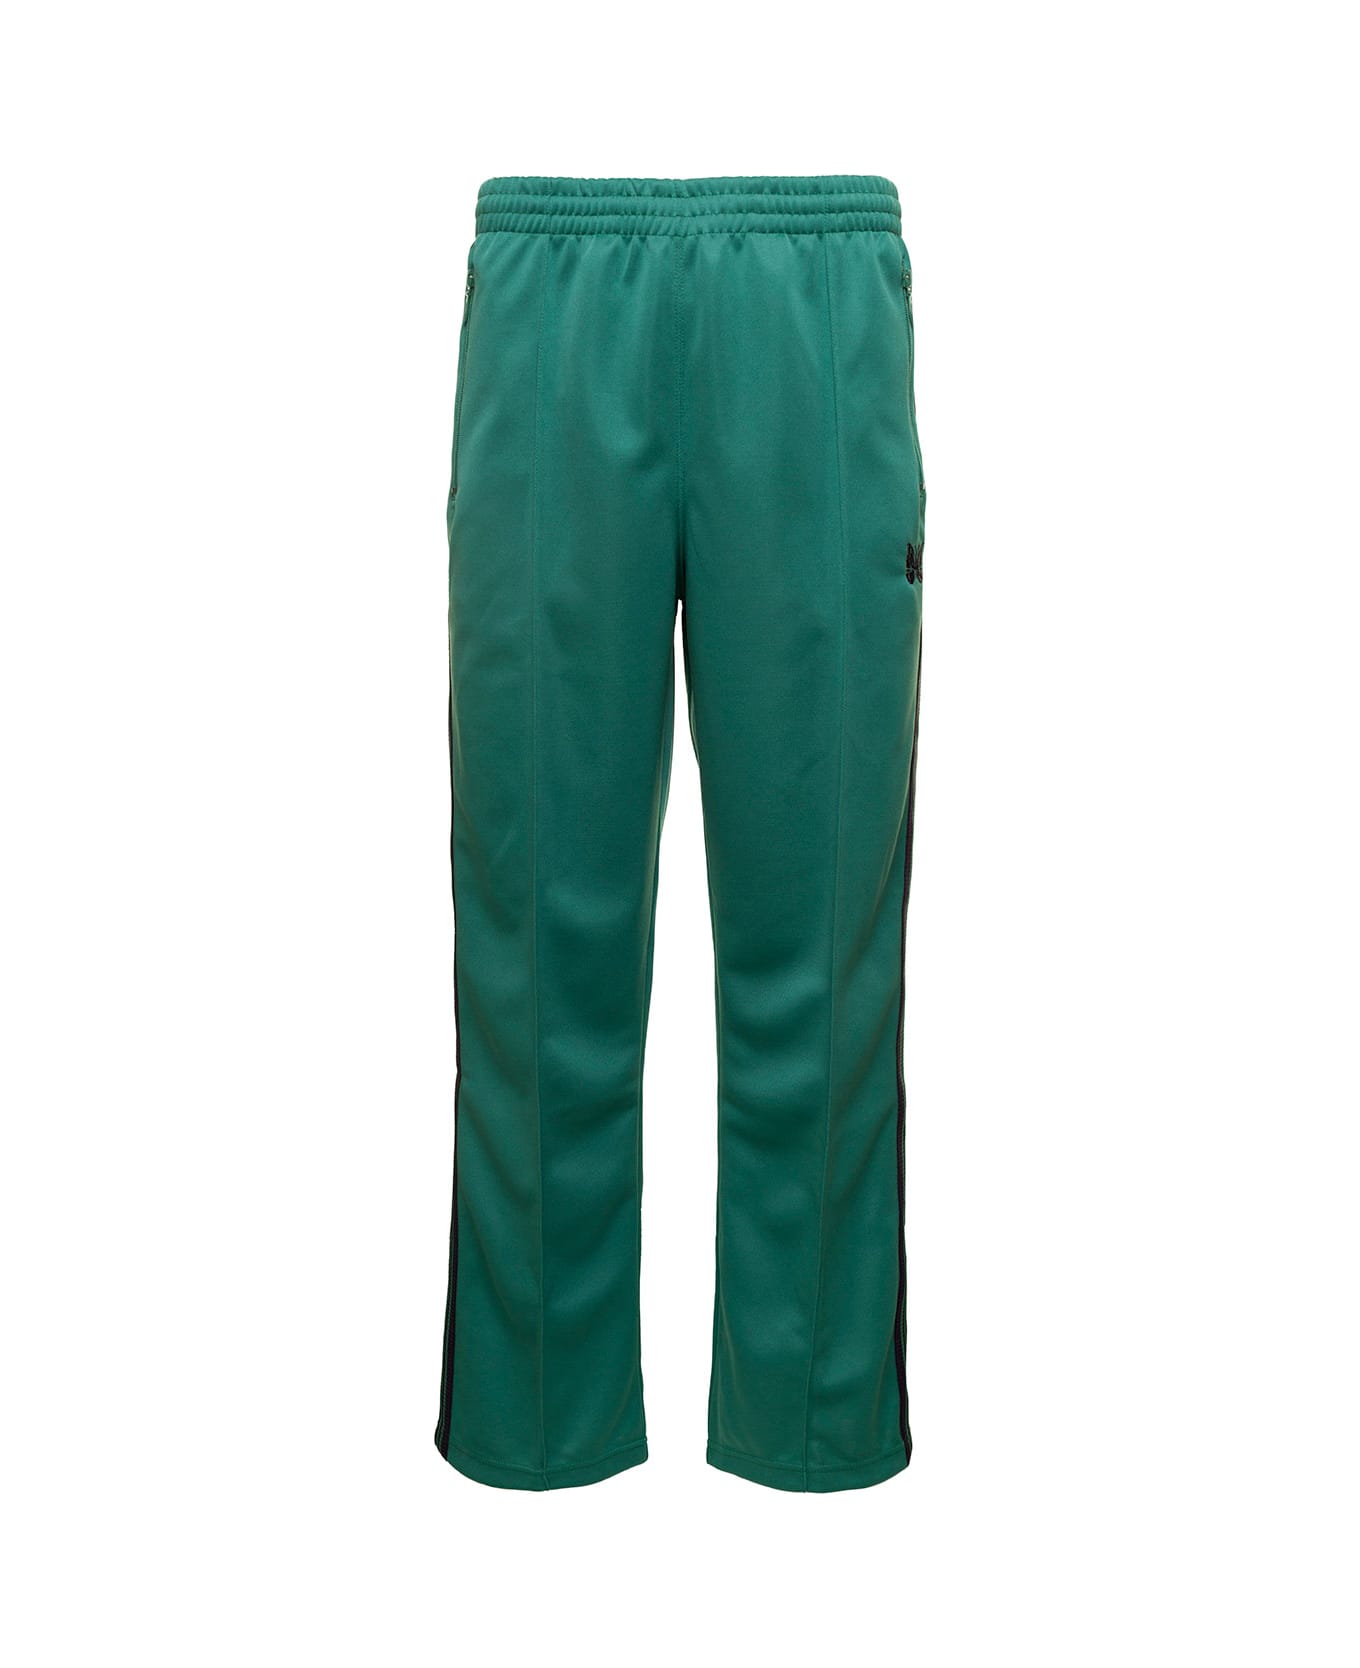 Needles Track Pants With Side Stripe In Green Technical Fabric Man - Green